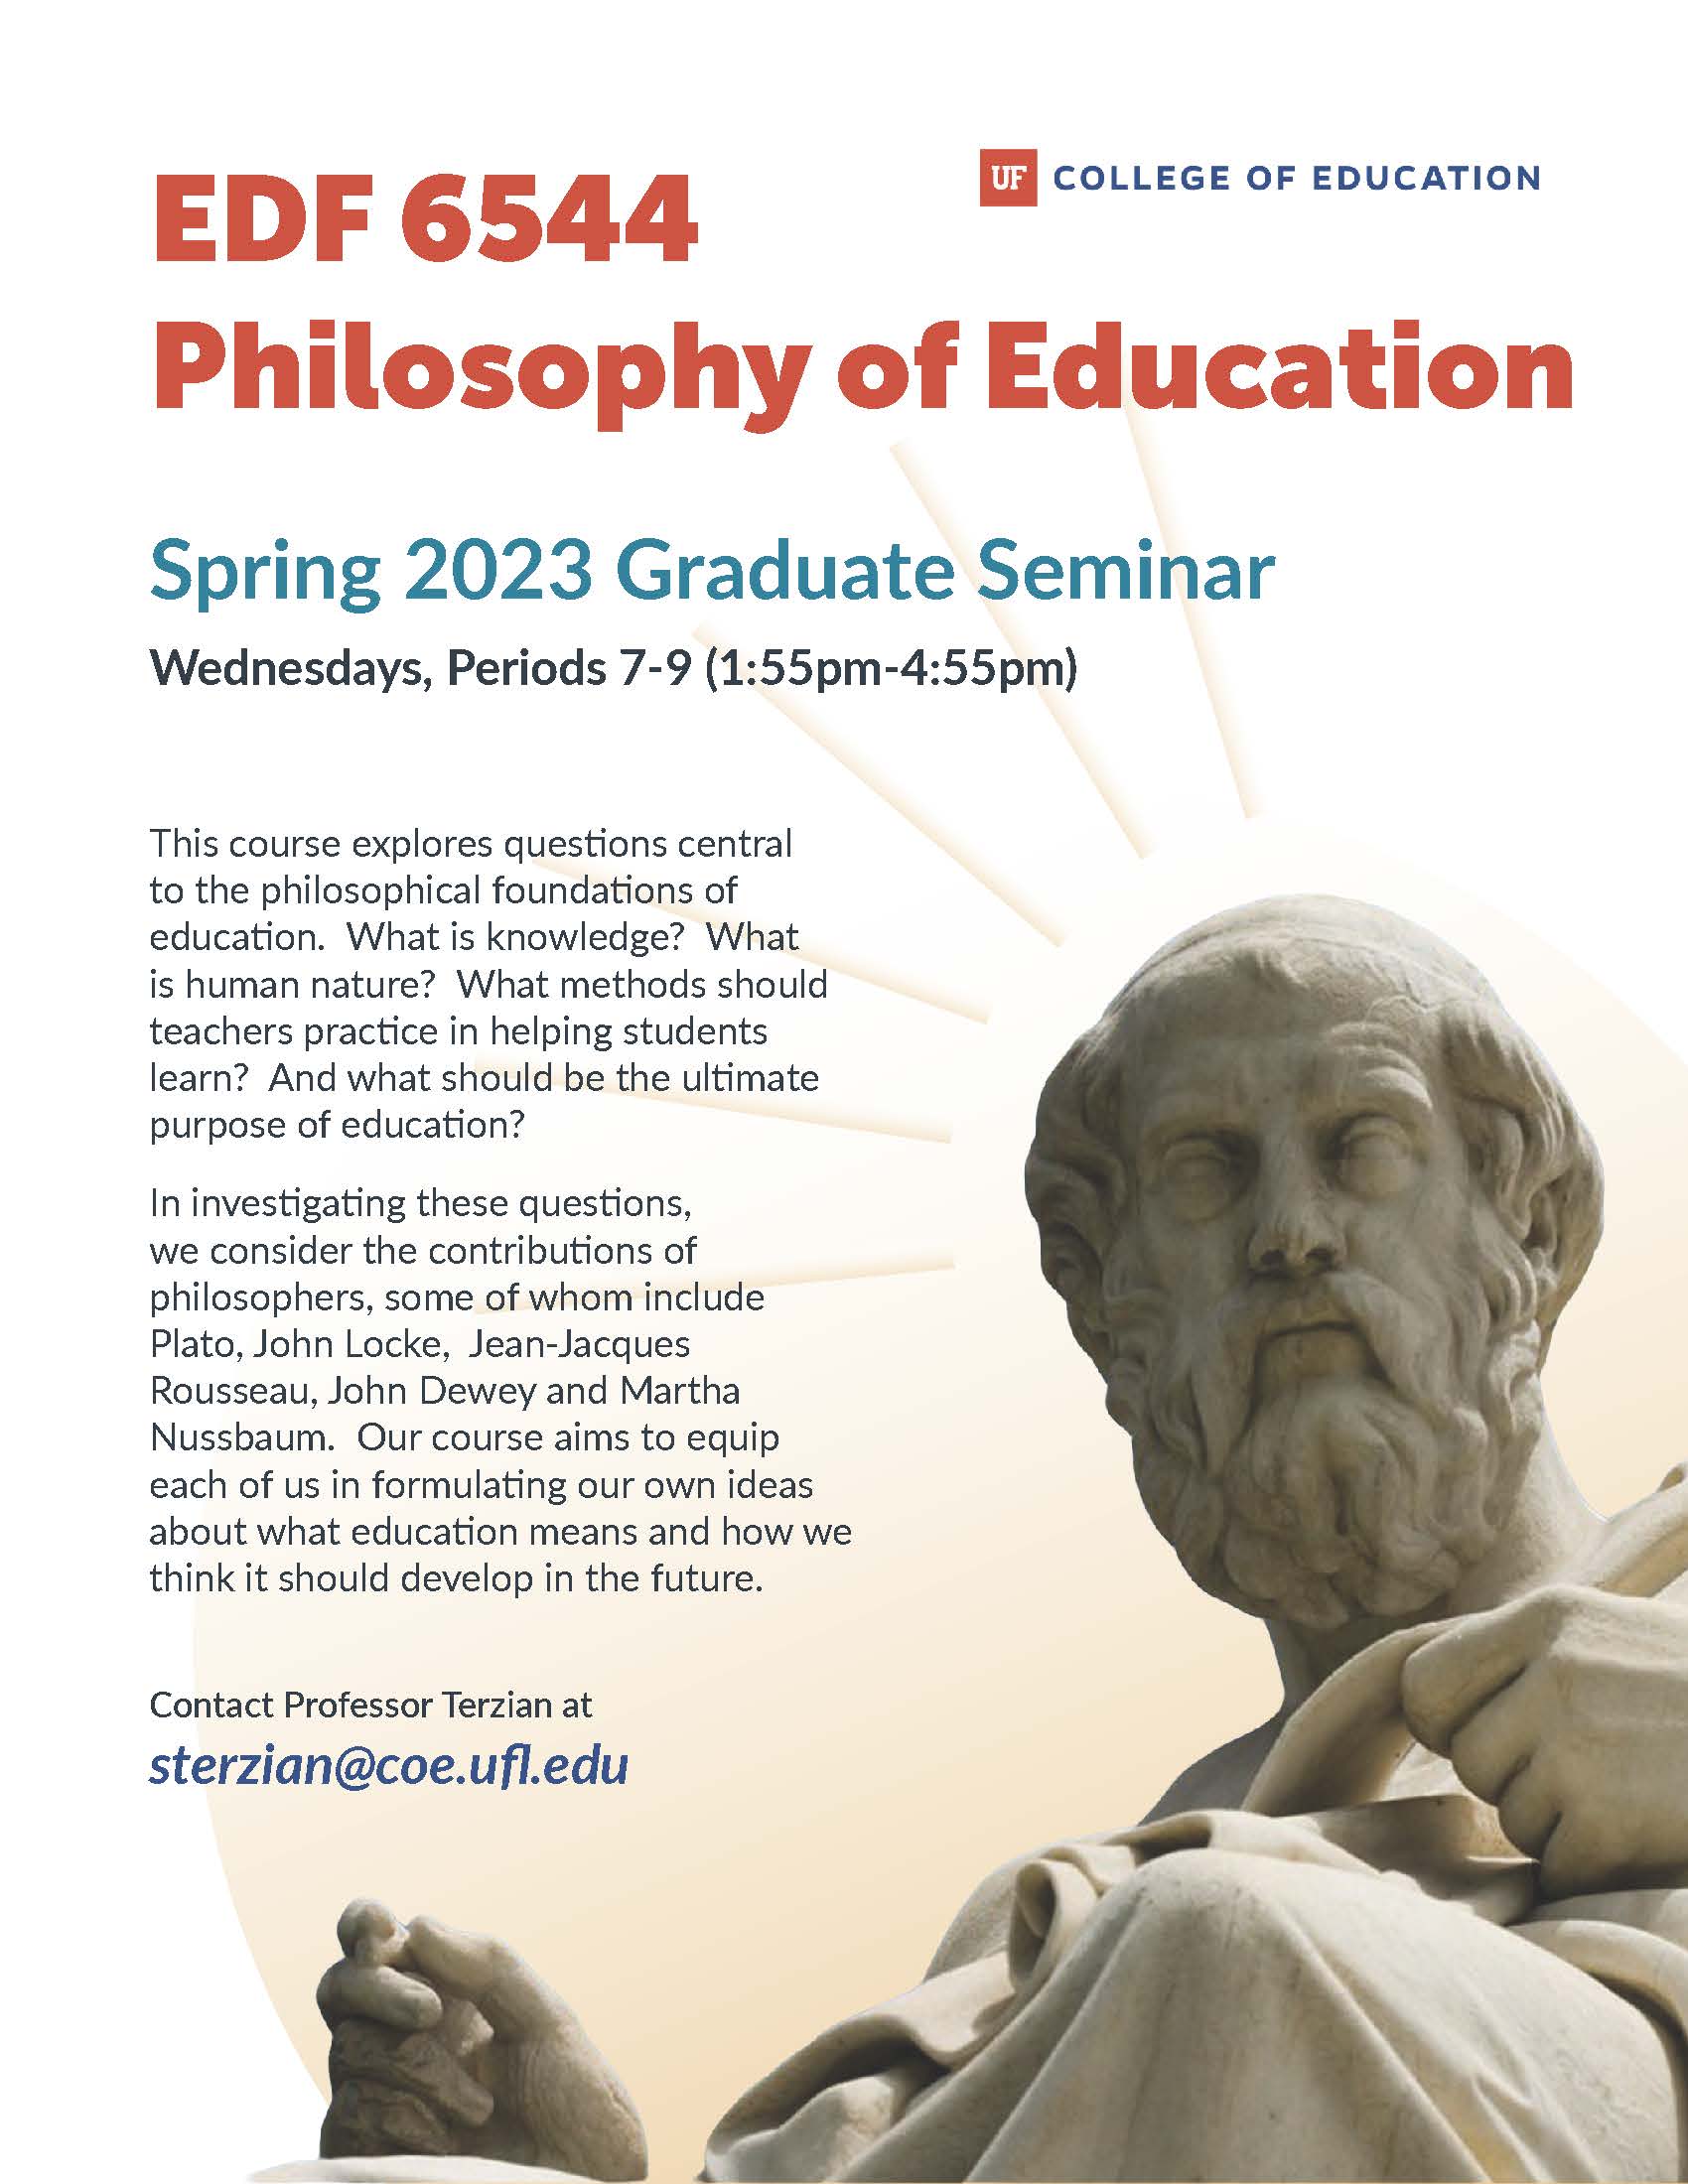 A flyer for EDF 6544 Philosophy of Education course.